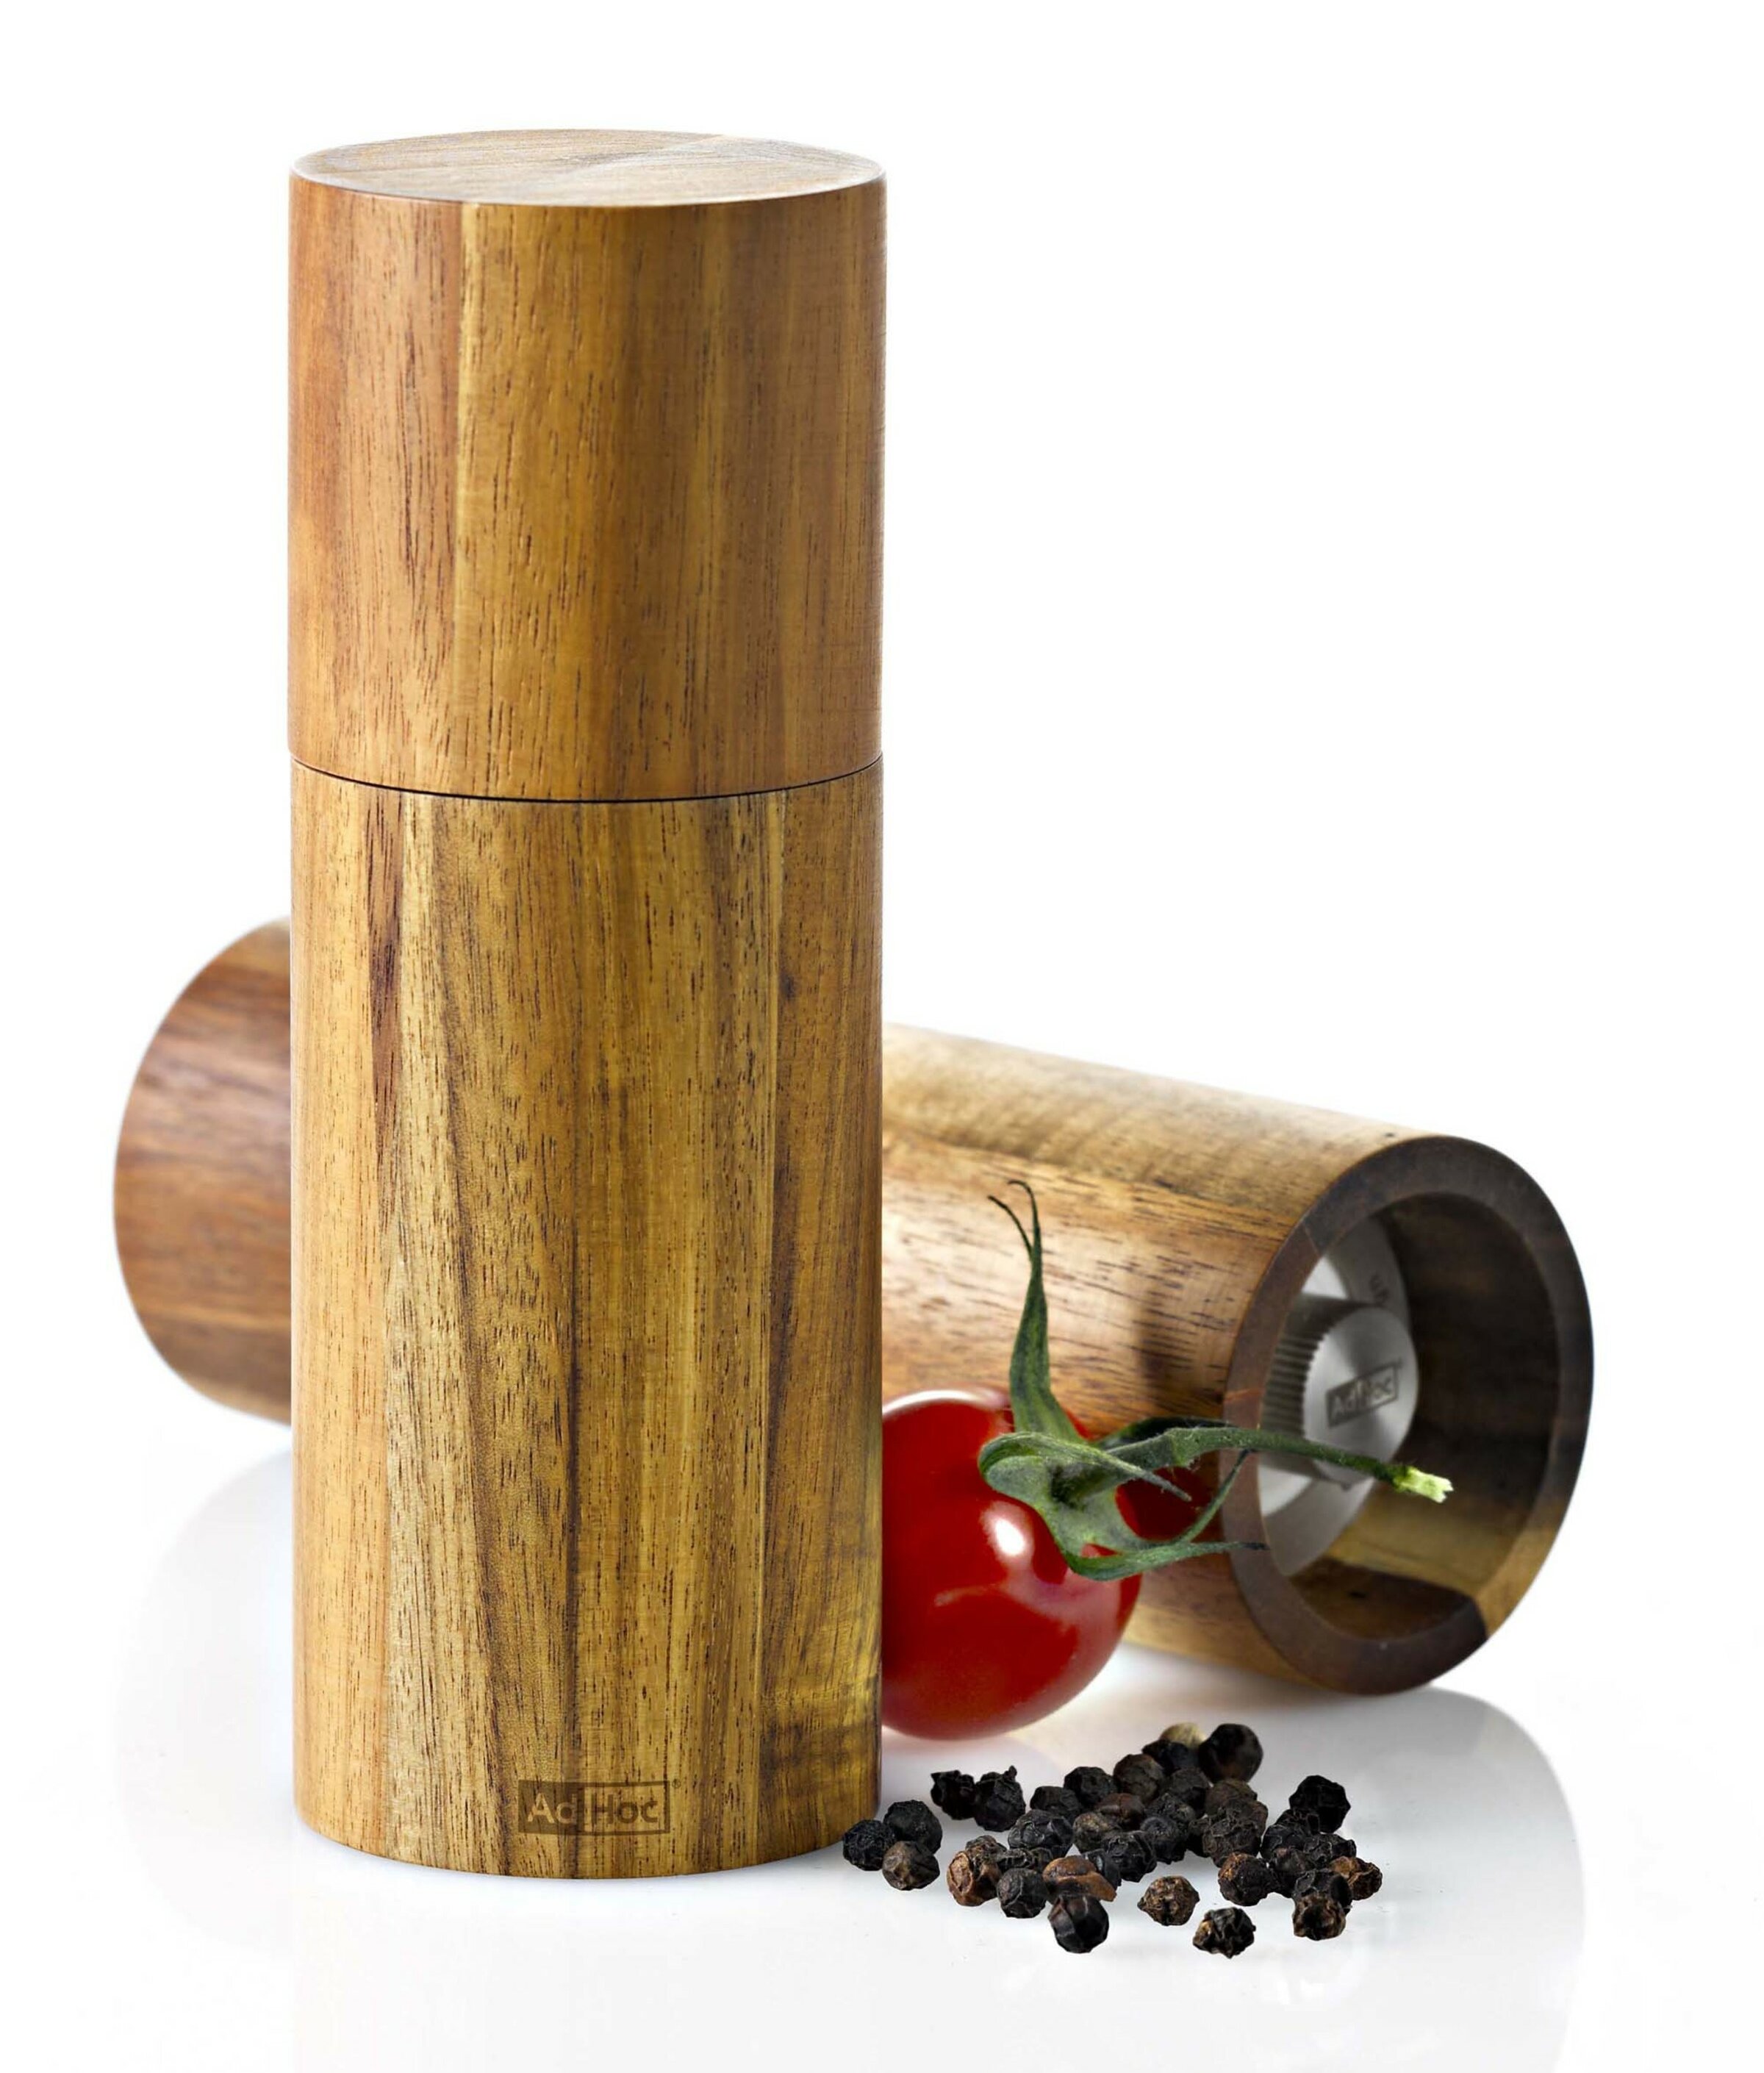 AdHoc 1 grinder only ACACIA Mill Small Salt and Pepper Grinder